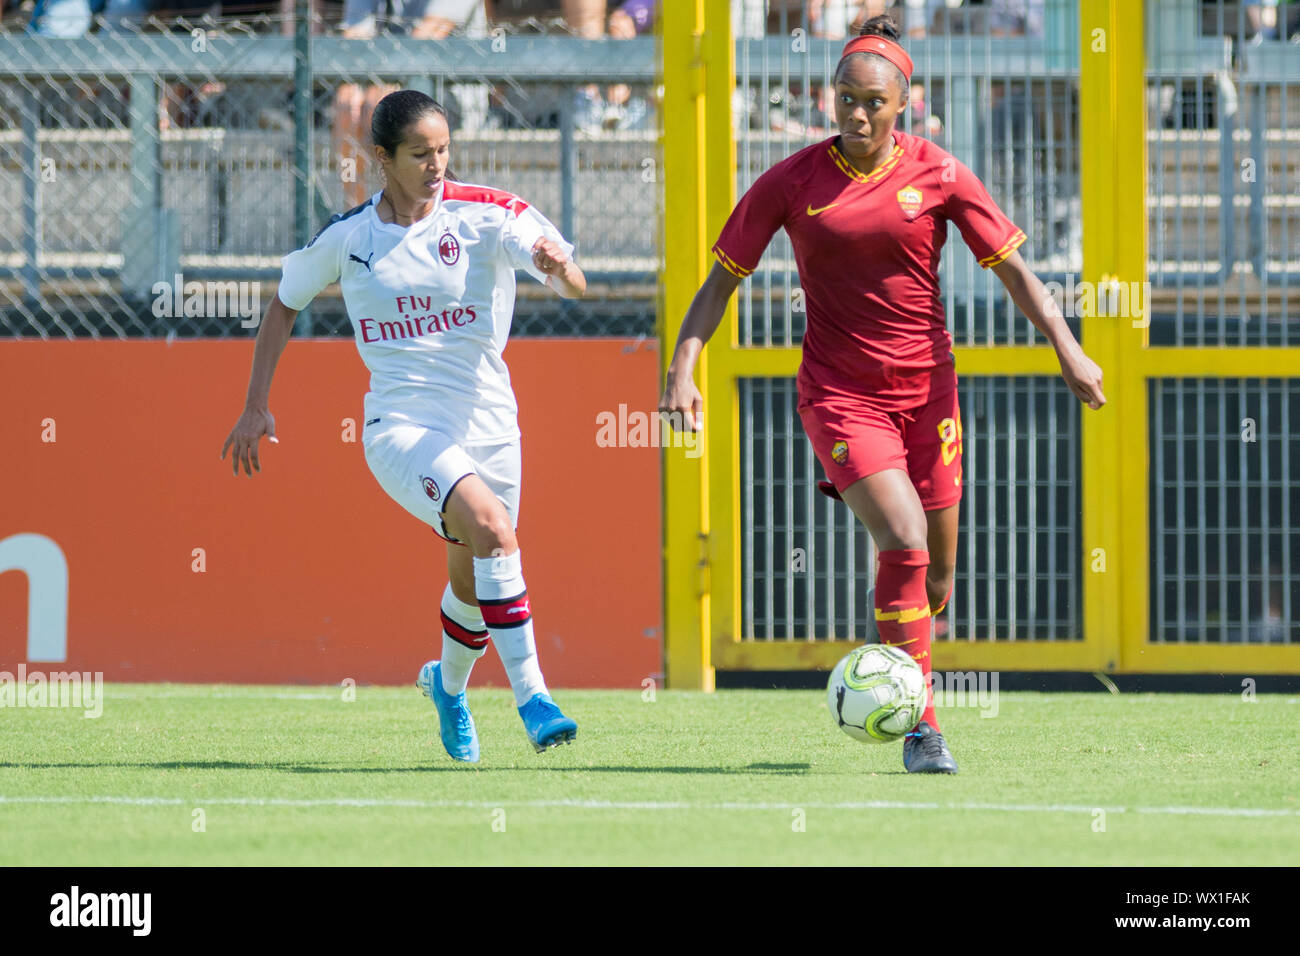 ALLYSON SWABY AS ROMA INSEGUITA FROM LADY PATRICIA ANDRADE AC MILAN  during Roma Vs Milan , Roma, Italy, 15 Sep 2019, Soccer Italian Soccer Serie A Wo Stock Photo